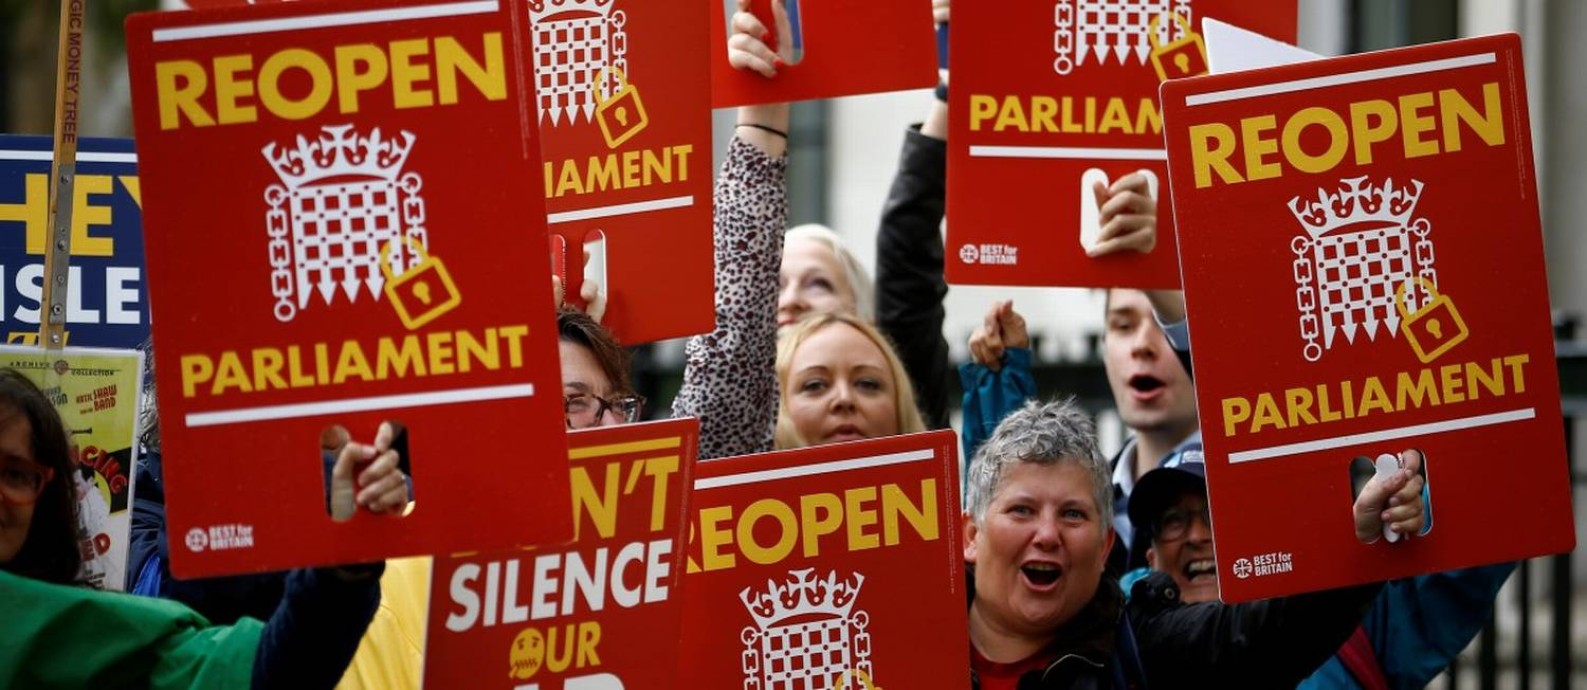 Demonstrators react on the ruling of the Supreme Court during a protest outside the Supreme Court in London, Britain September 24, 2019. REUTERS/Henry Nicholls Foto: HENRY NICHOLLS / REUTERS